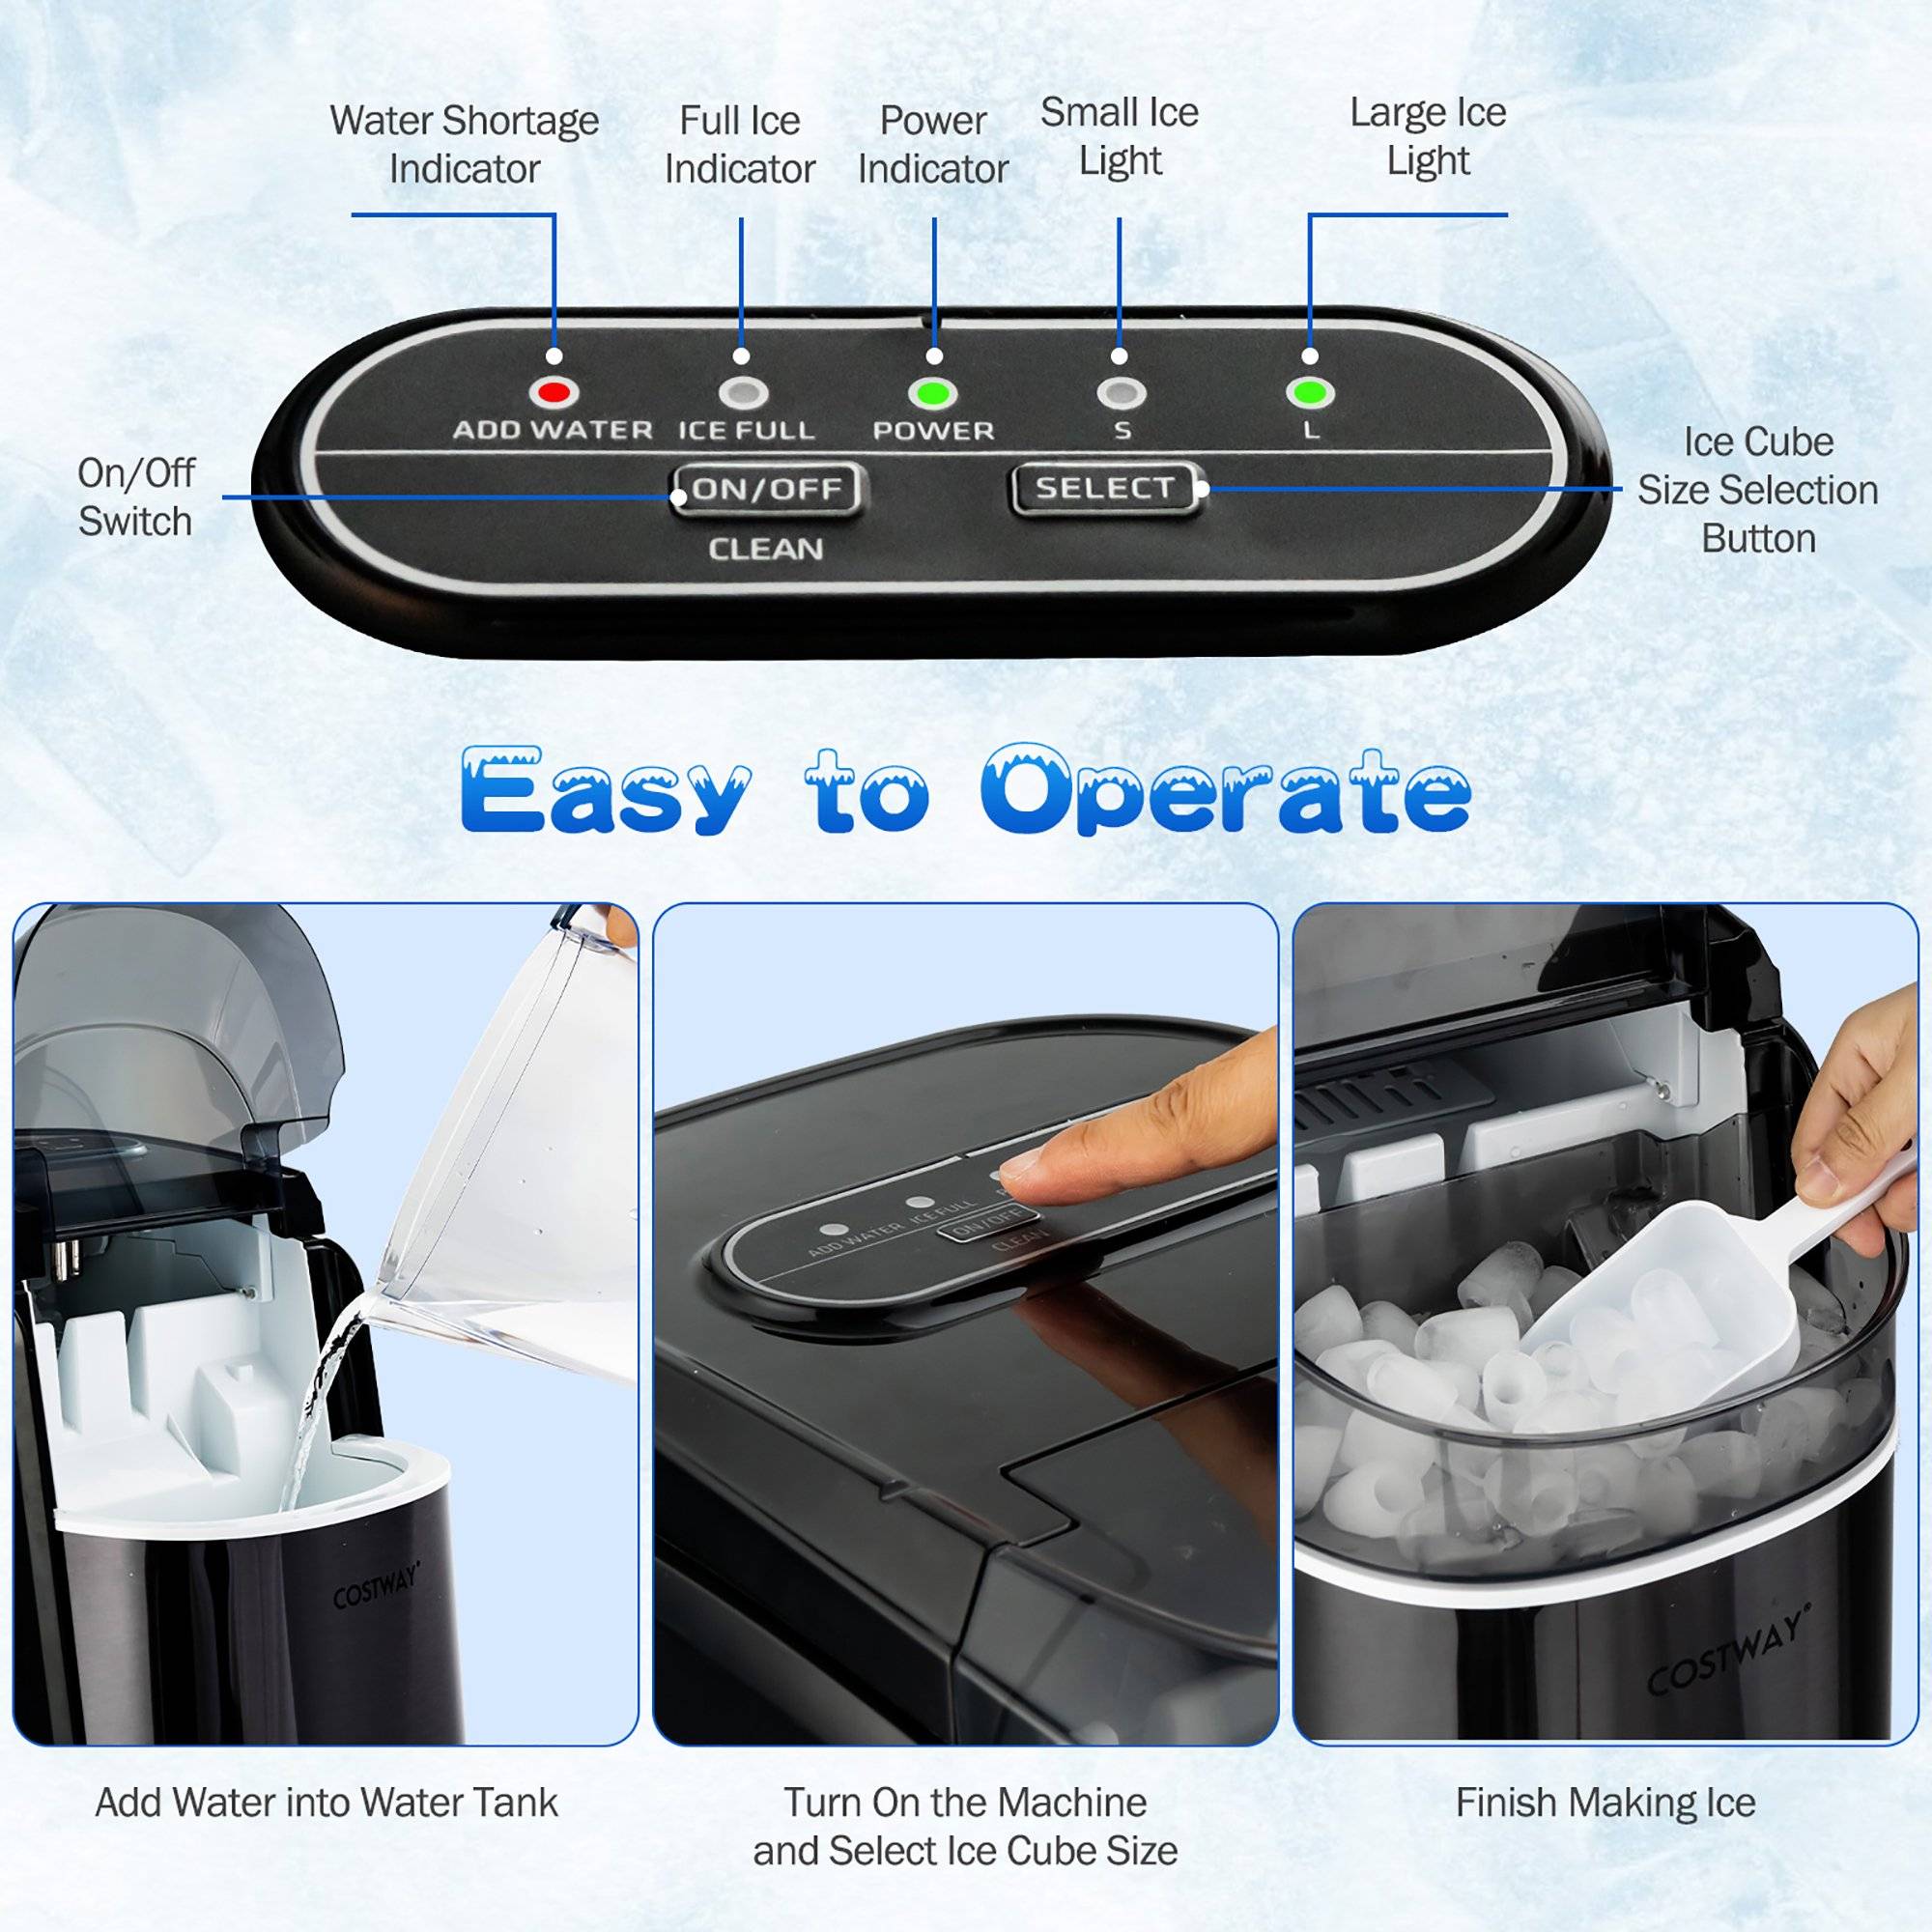  EUHOMY Nugget Ice Maker Countertop, Max 33lbs/24H, 2 Ways  Water Refill, LED Light, Self-Cleaning Pebble Ice Maker